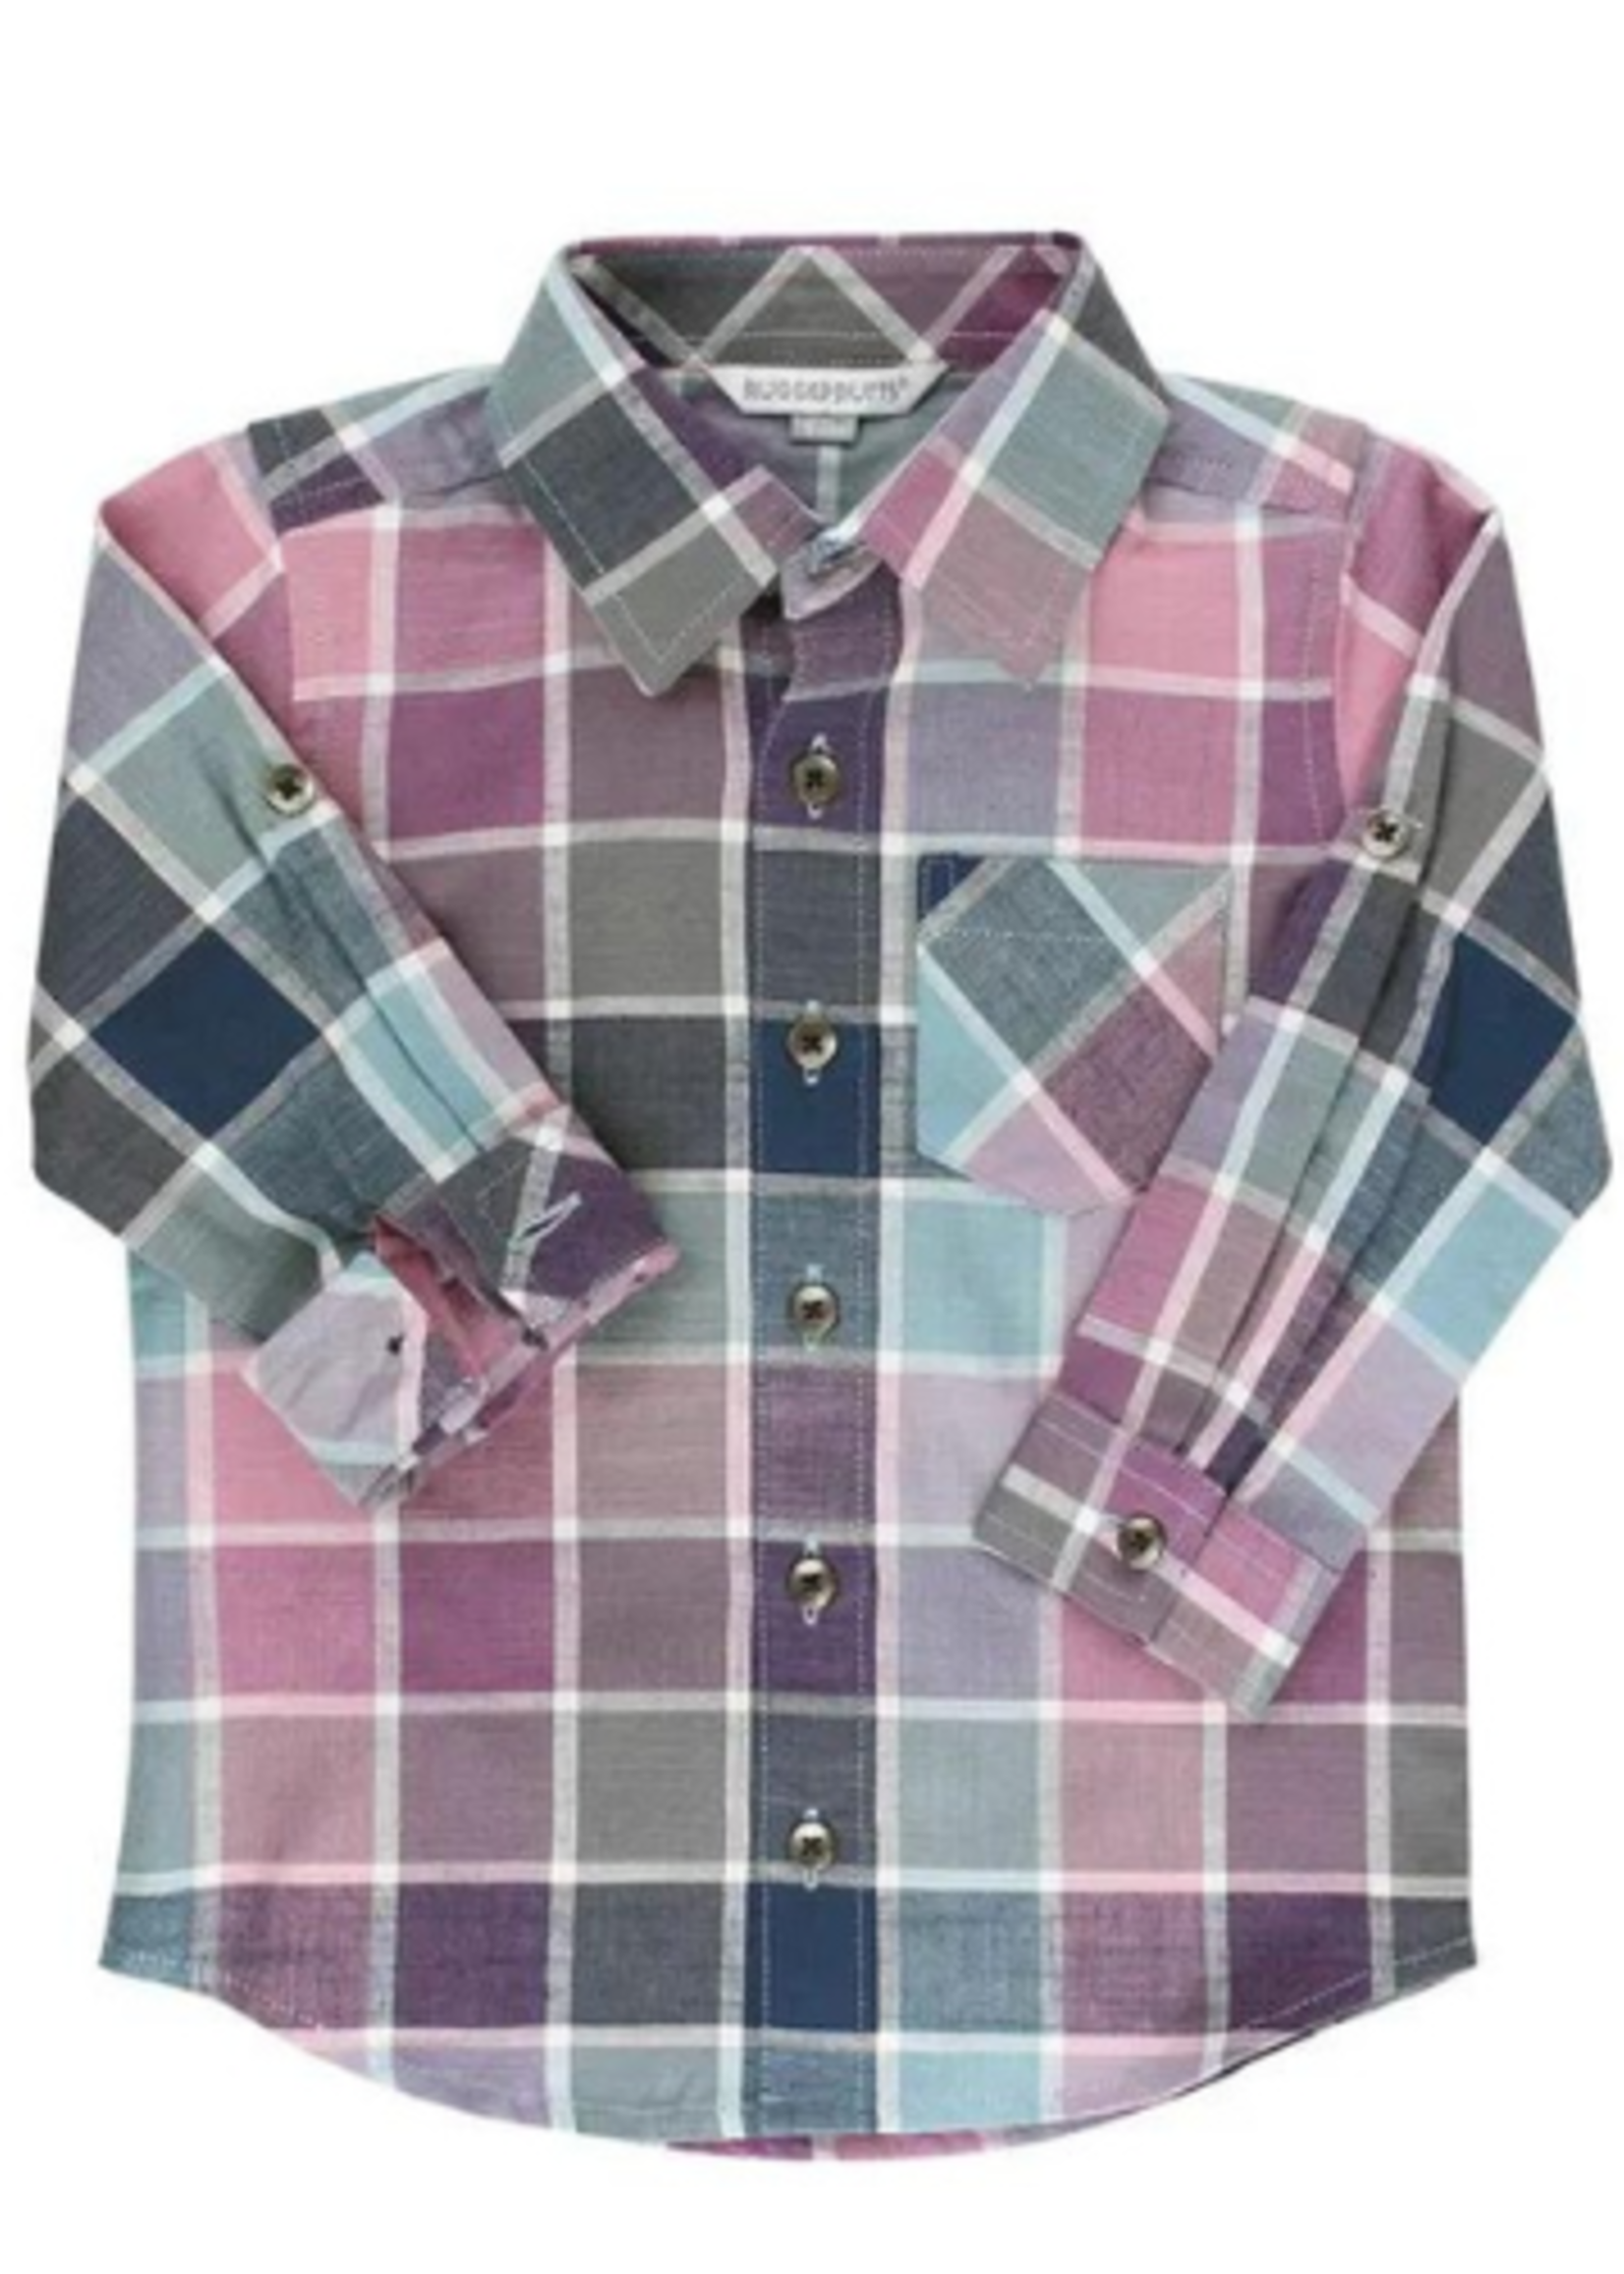 Rugged Butts Multi Violet Plaid Button Down Shirt